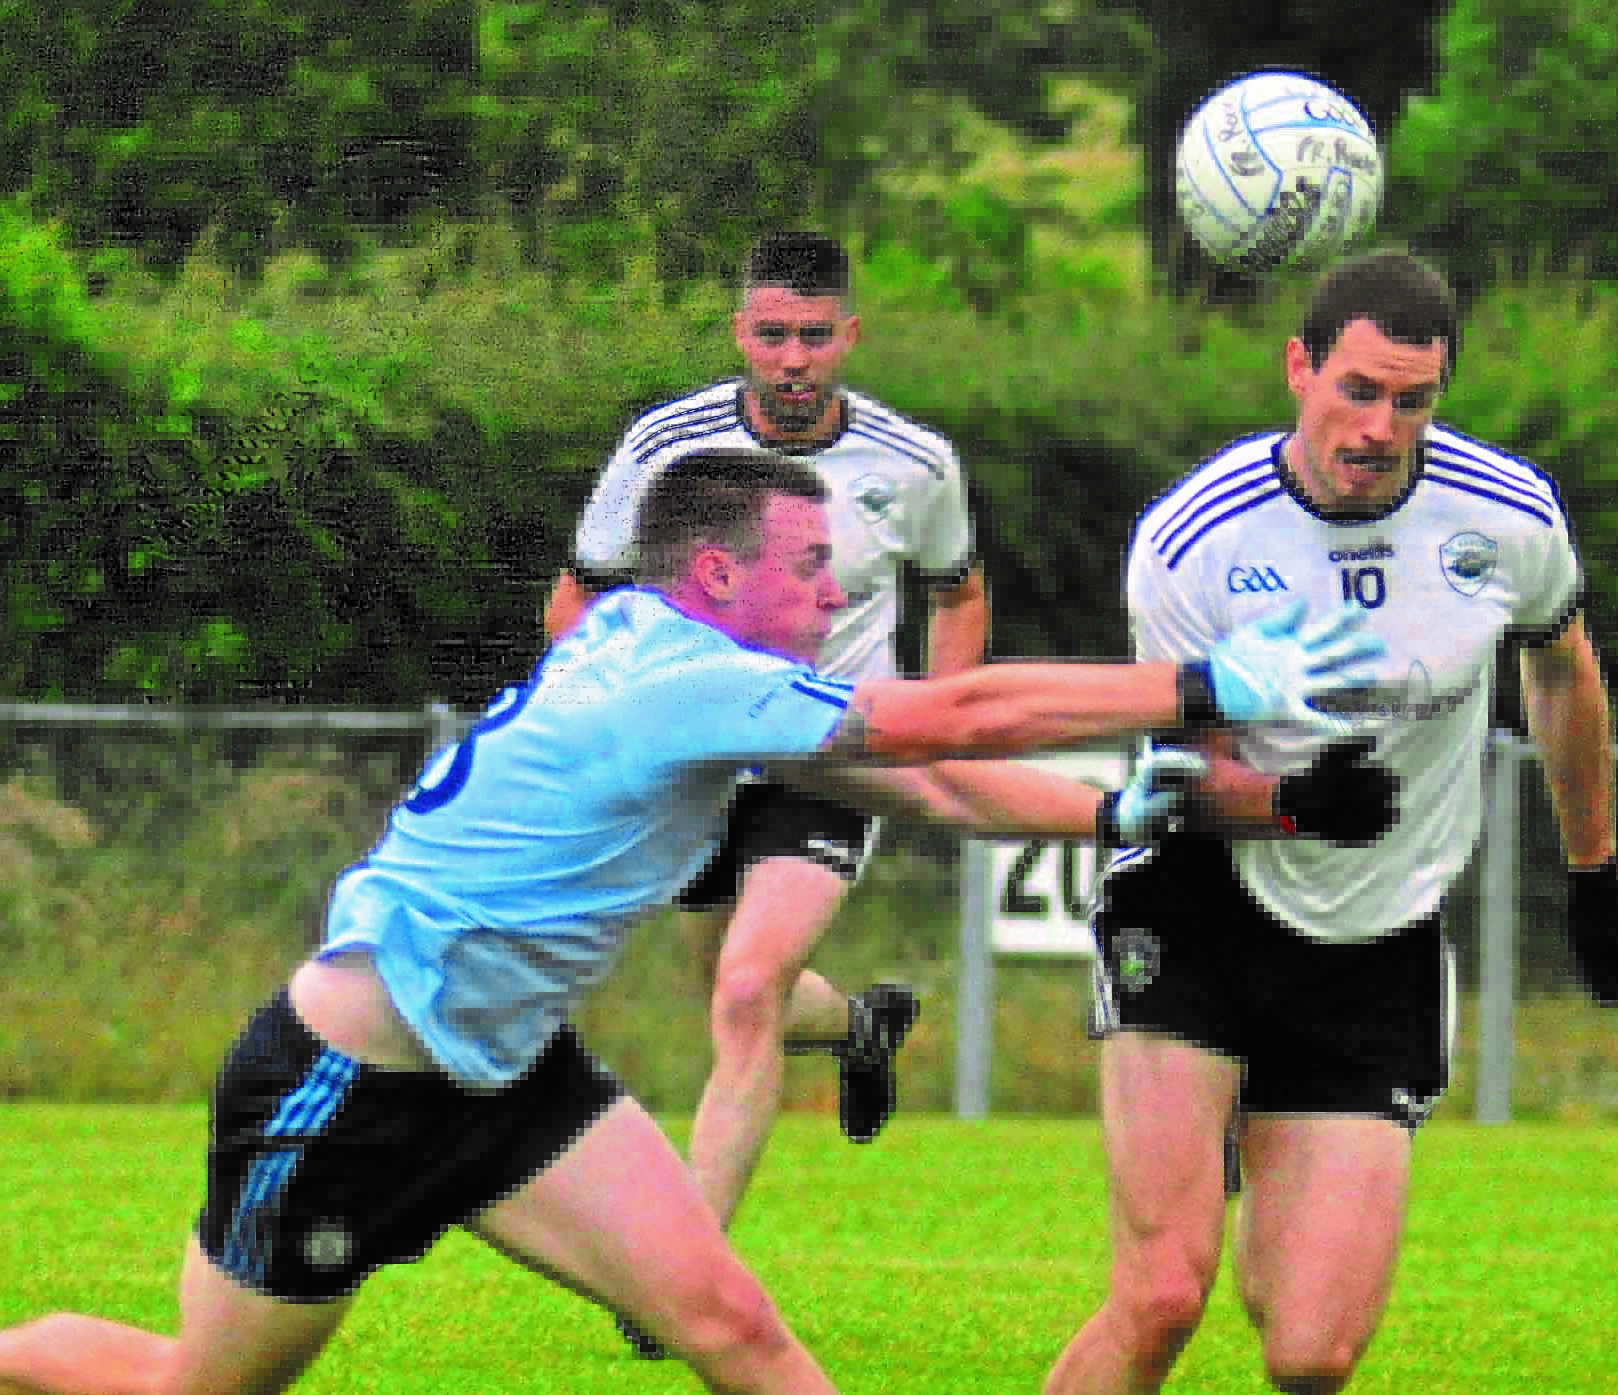 Cookstown set their focus for the long haul